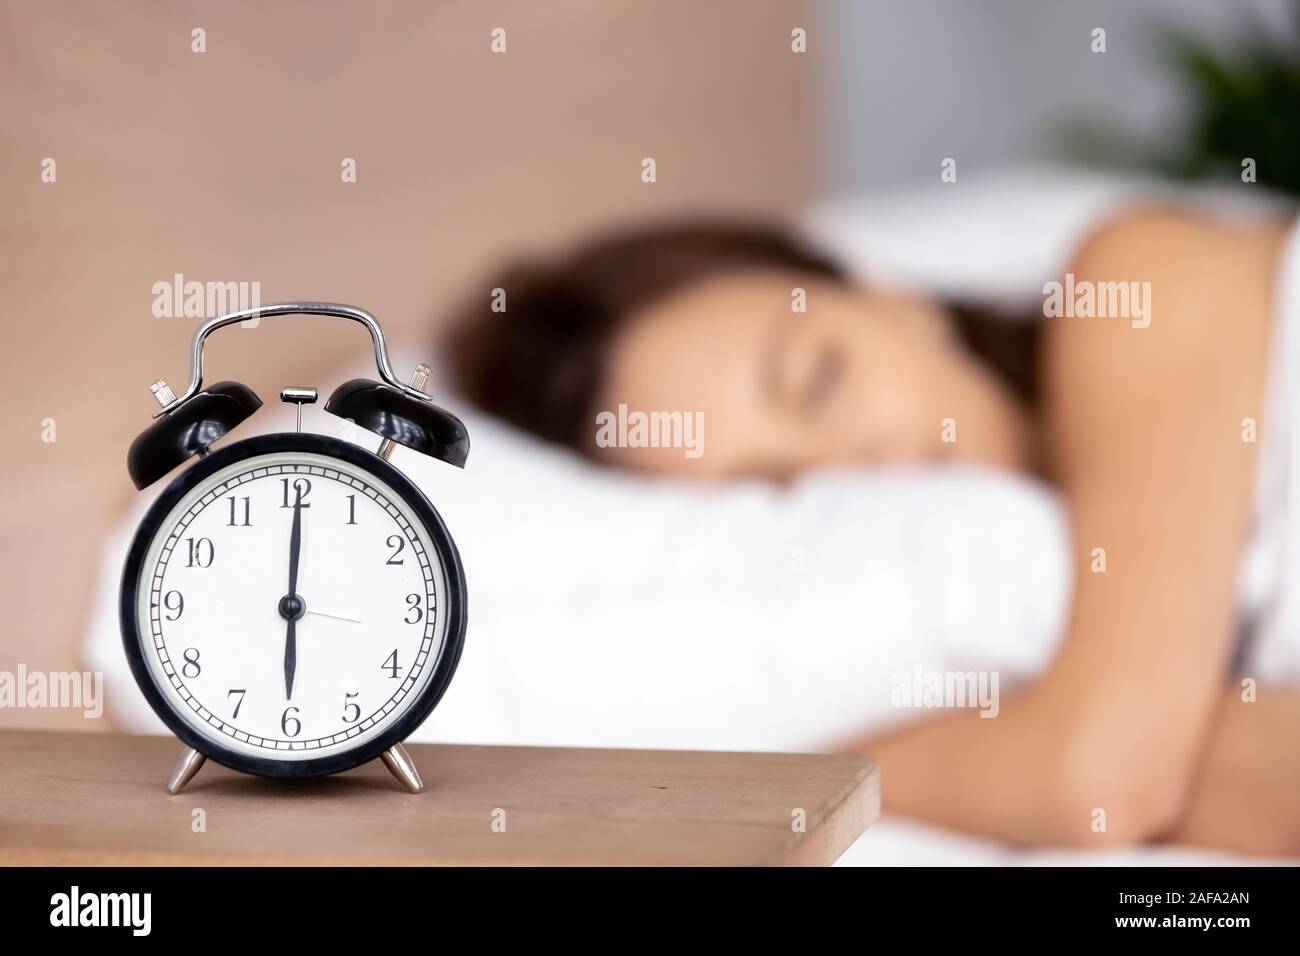 Alarm clock on bedside table with woman sleeping on background Stock Photo